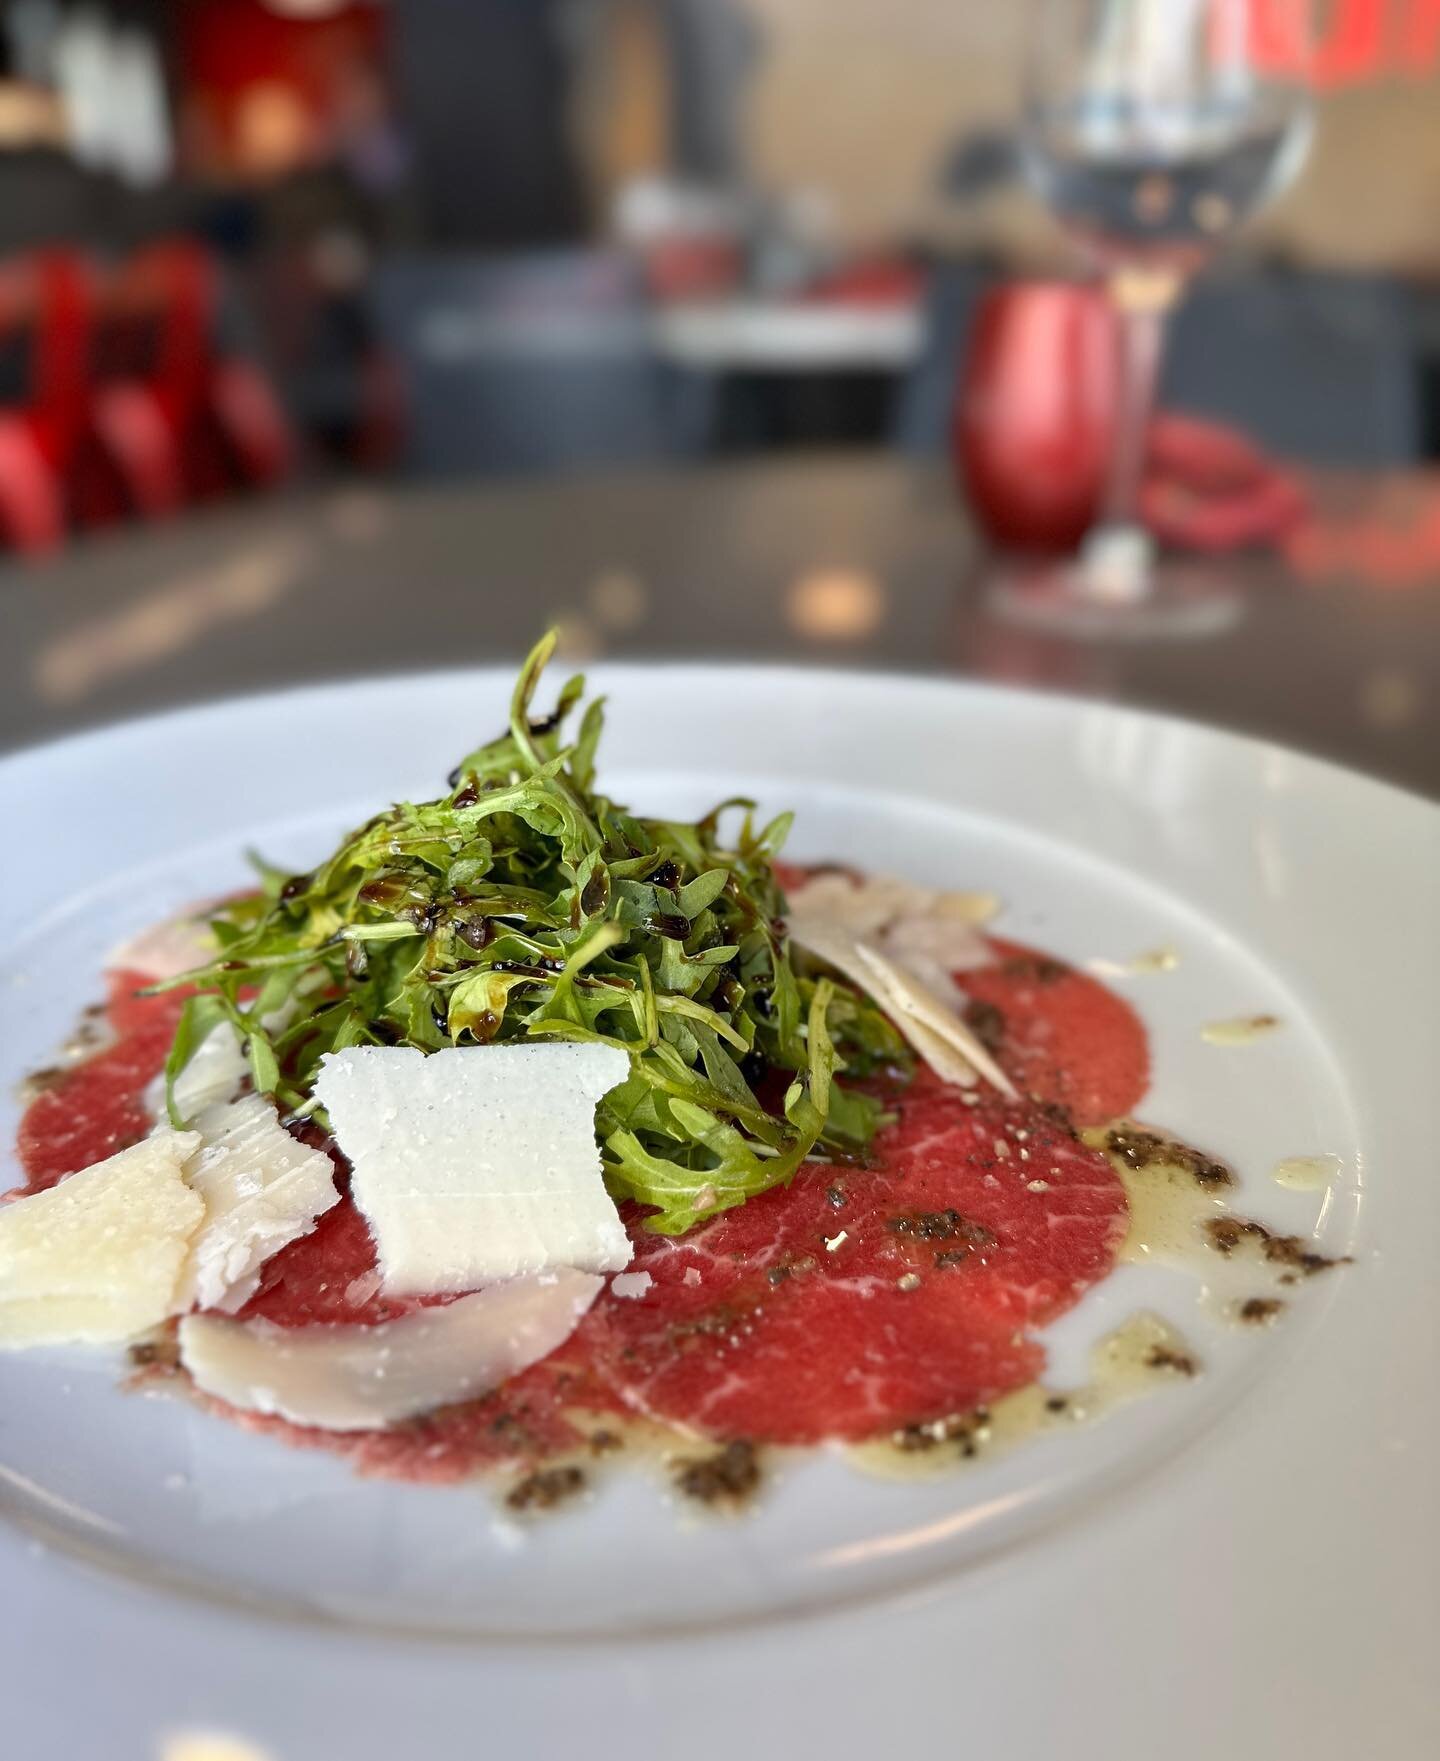 Our Beef Carpaccio 🤩

Wafer thin slices of beef with black truffle oil and shavings of Parmesan, garnished with wild rocket leaves 🍴

Call or DM to book your table 📞